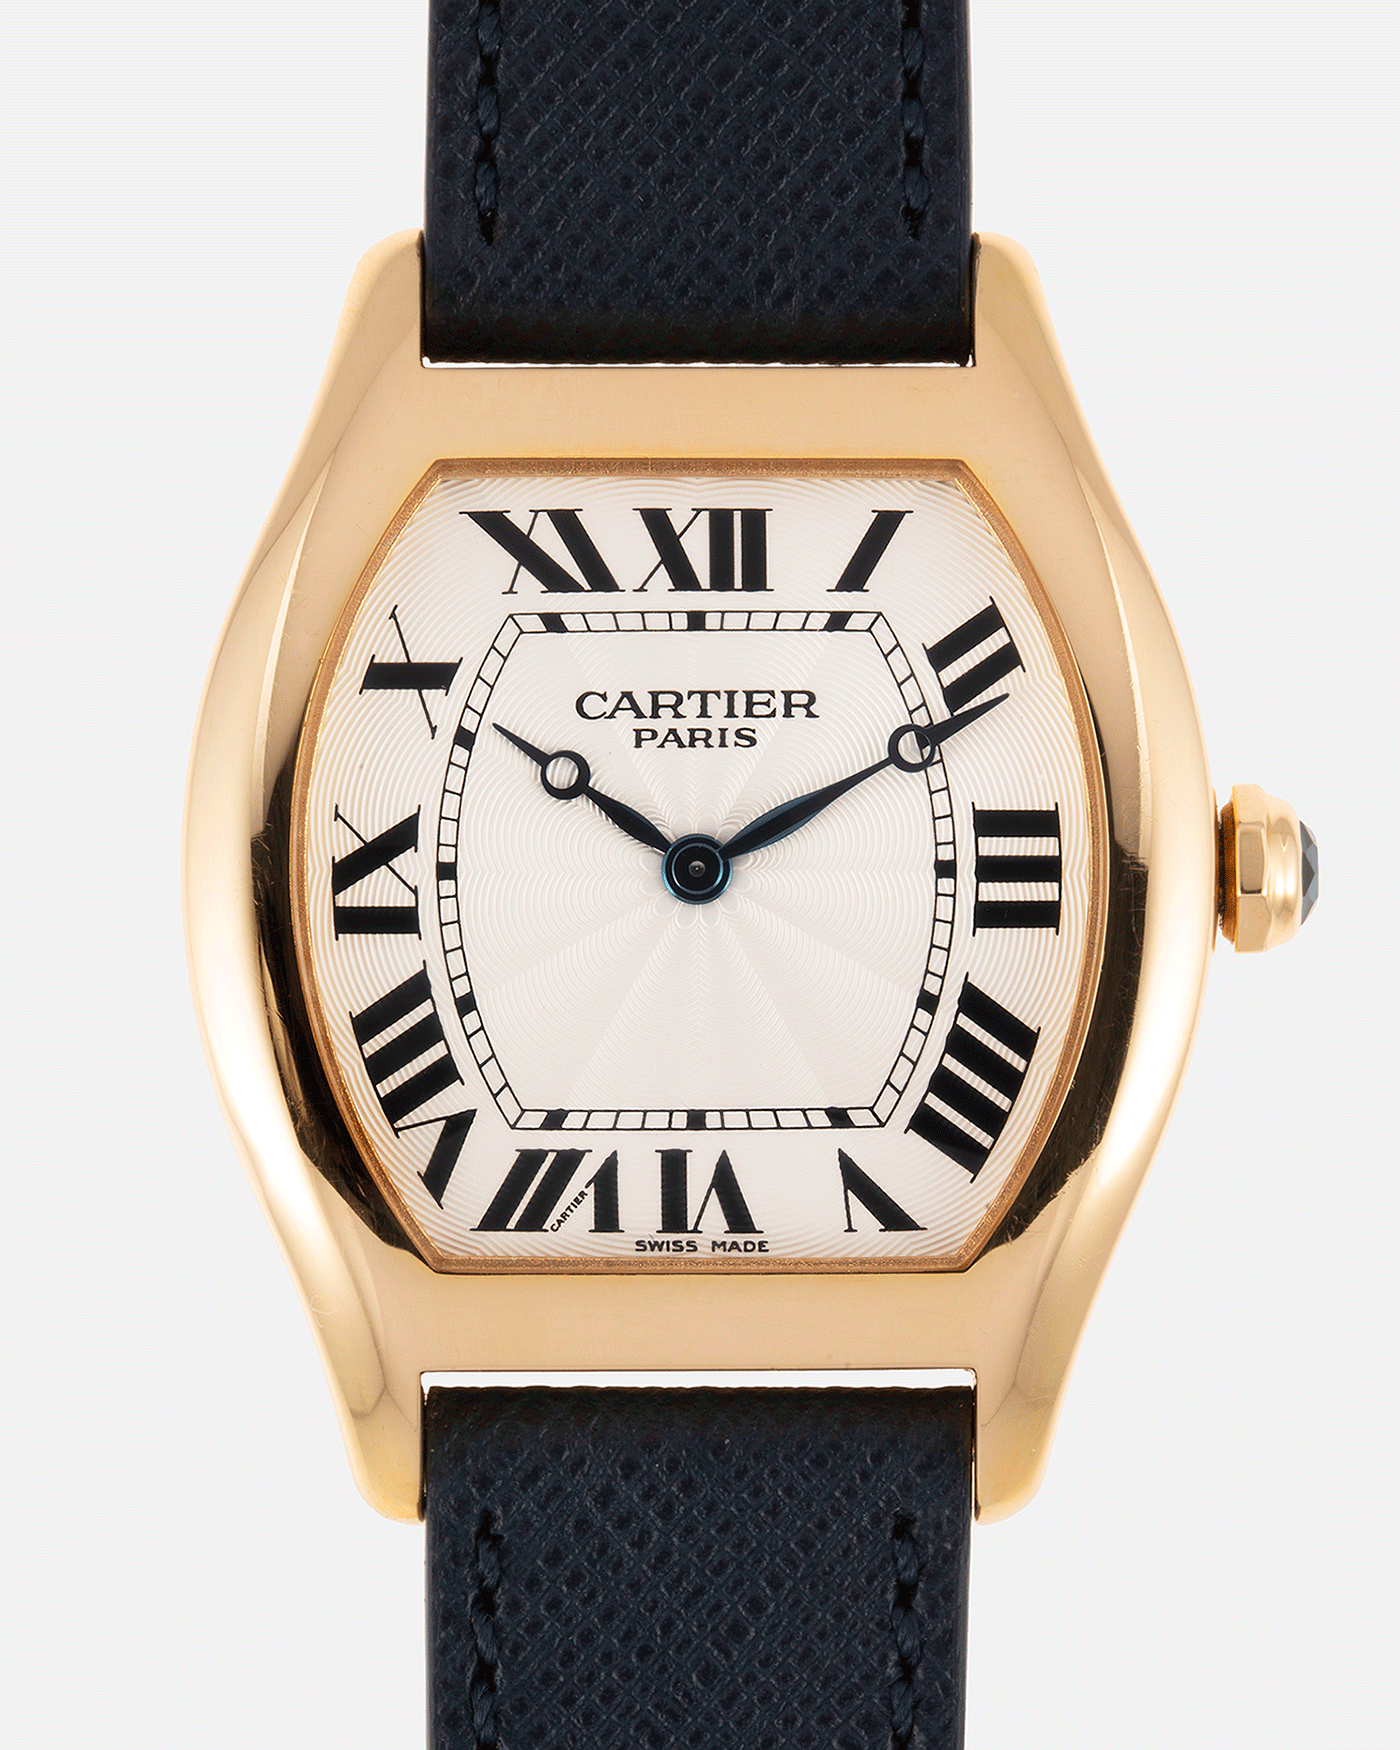 Brand: Cartier Year: 2000’s Model: CPCP Collection Prive Tortue Reference: 2496 Material: 18k Yellow Gold Movement: Cartier Jaeger LeCoultre 9601MC Case Diameter: 43 x 35 mm Strap: Navy Blue Molequin Textured Calf Strap with separate 18k Cartier Yellow Gold Deployant